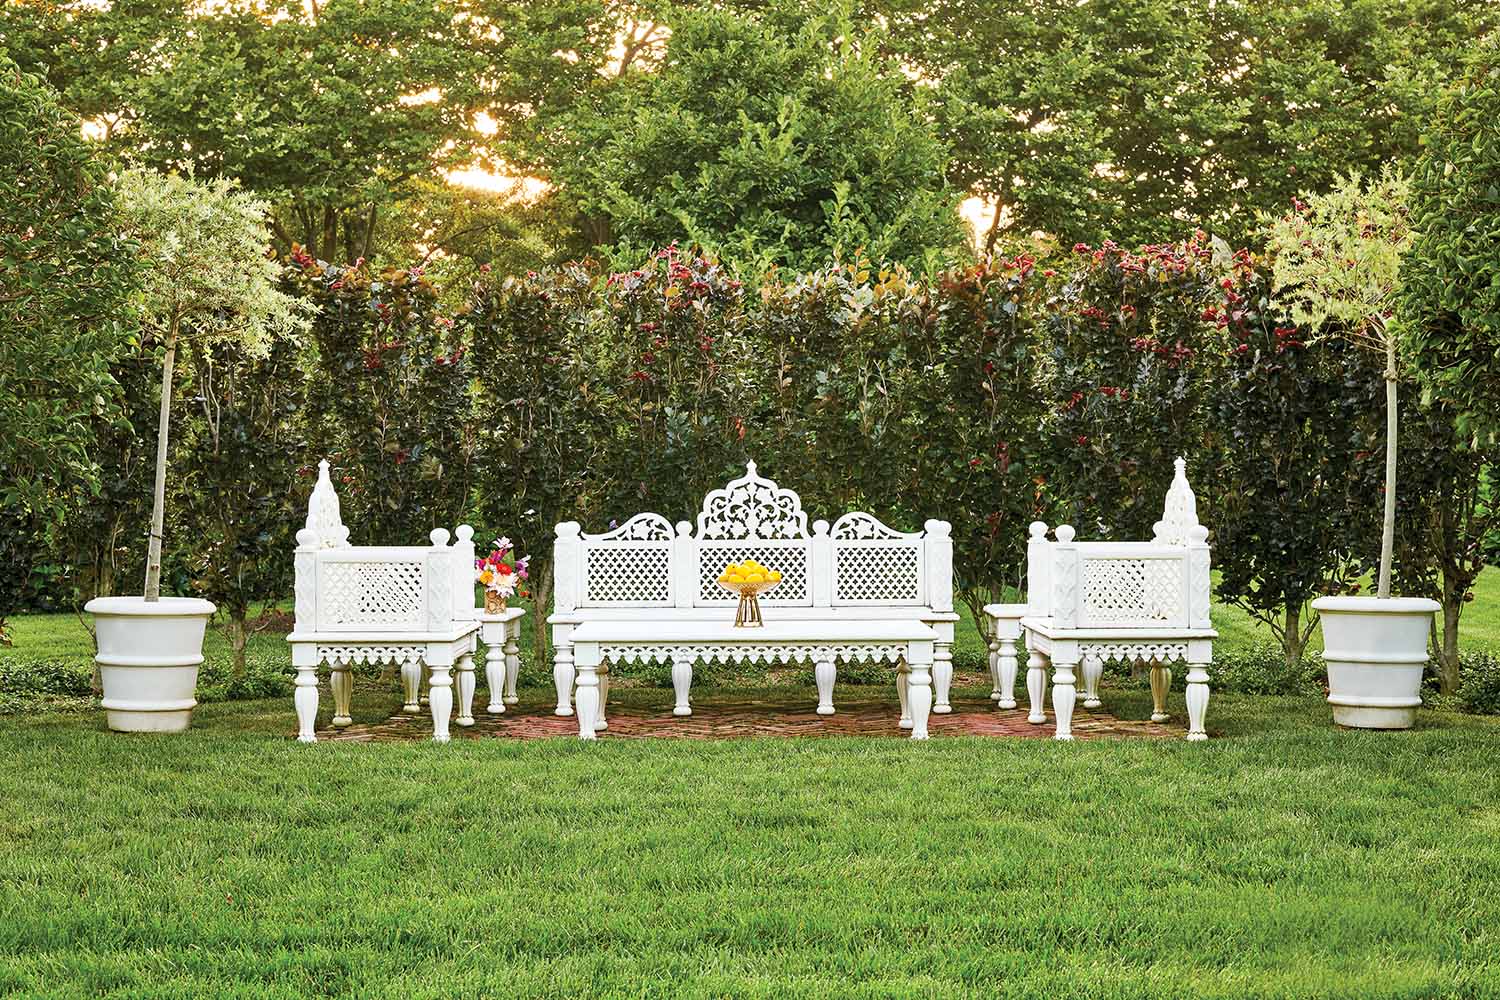 White Indian inspired outdoor furniture sit in a green lawn.